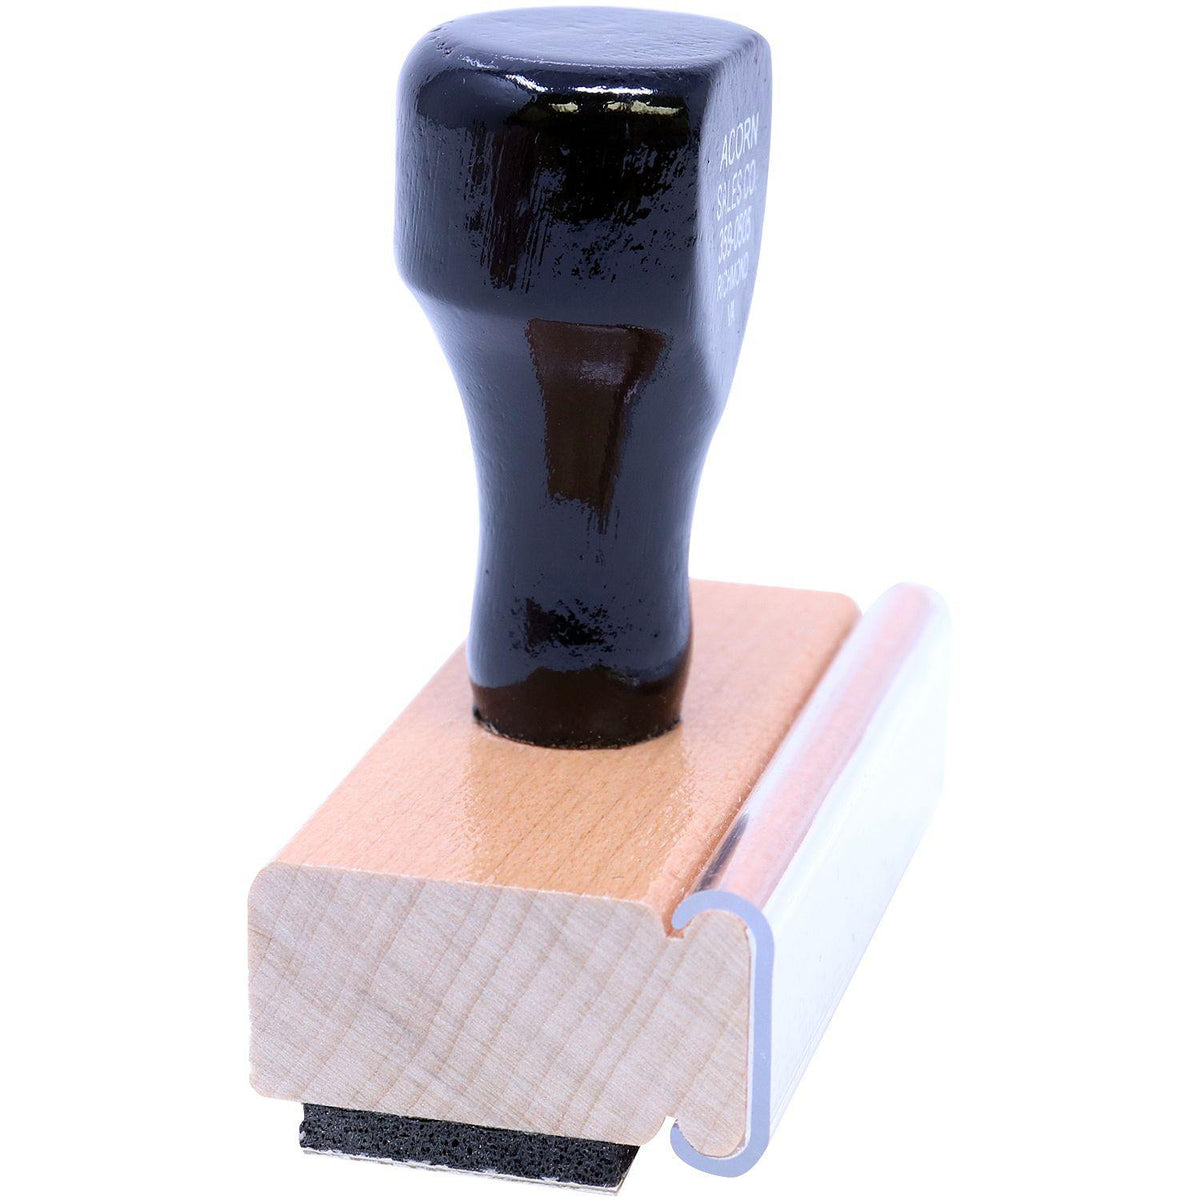 Living Will On File Rubber Stamp - Engineer Seal Stamps - Brand_Acorn, Impression Size_Small, Stamp Type_Regular Stamp, Type of Use_Legal, Type of Use_Medical Office